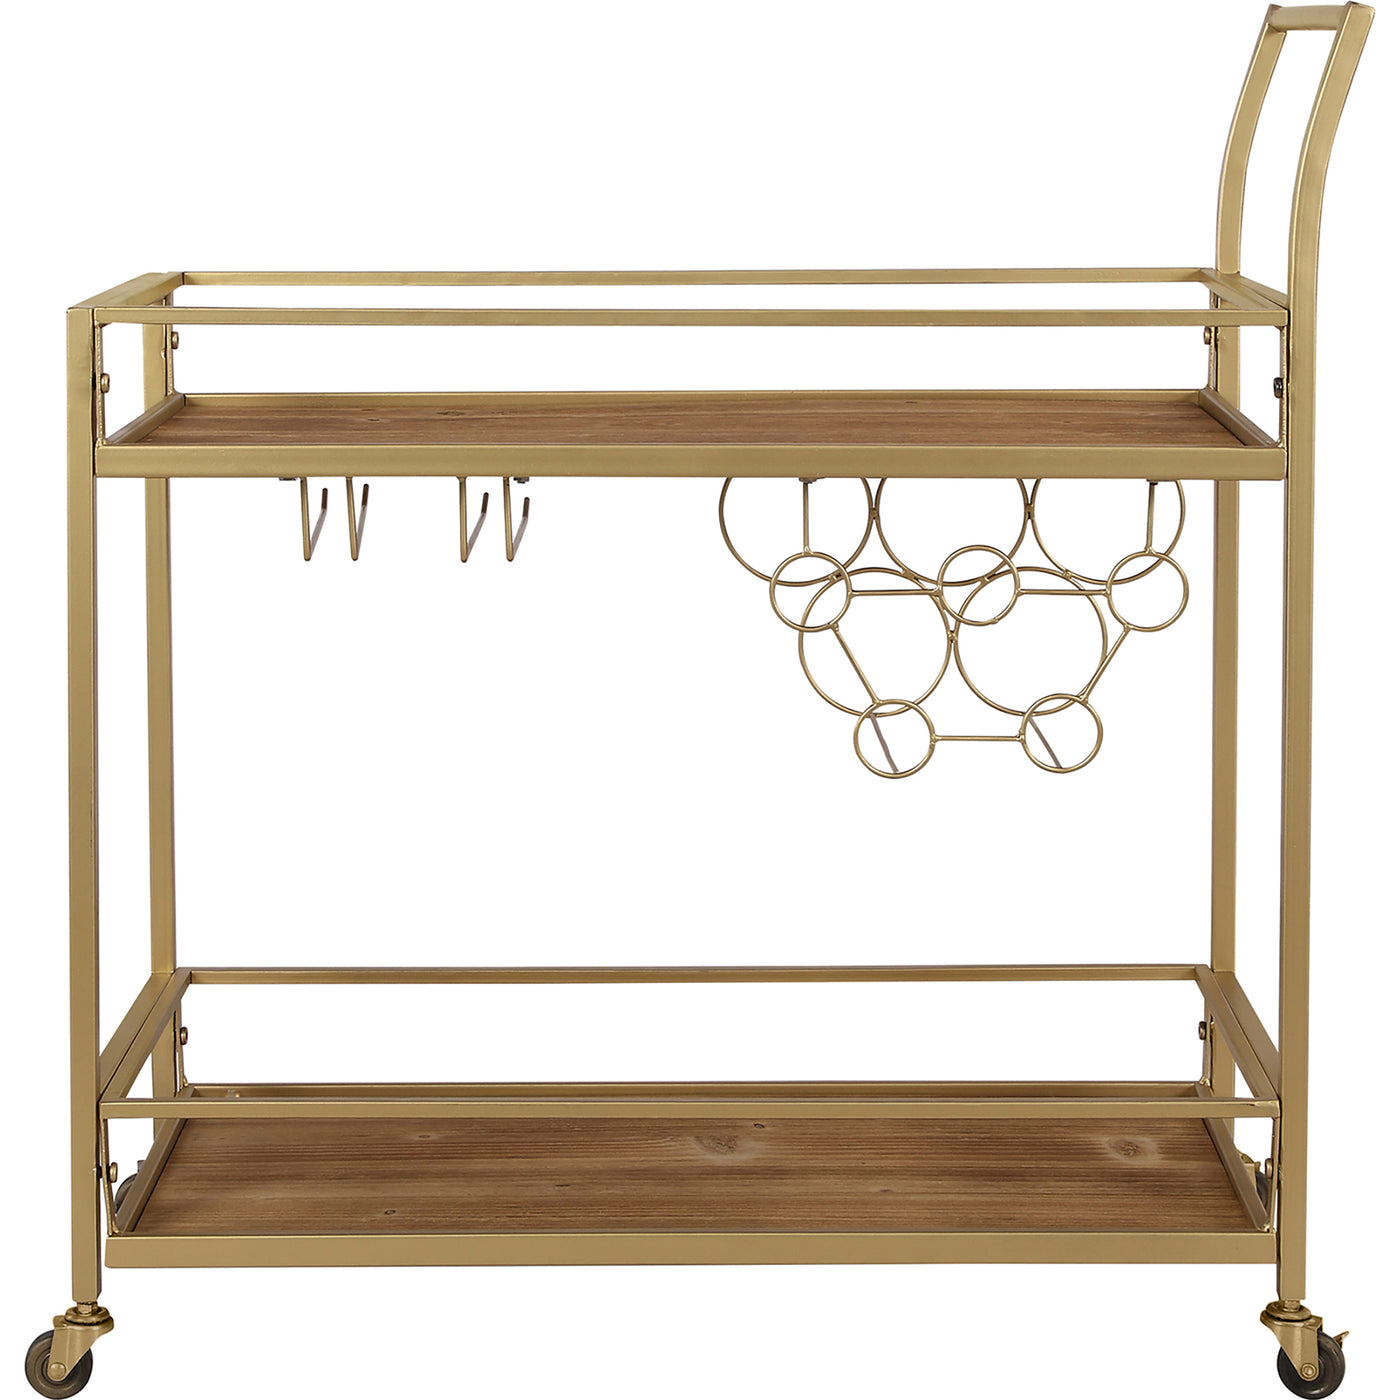 FirsTime & Co. Gold And Brown Francesca Bar Cart, Modern, Metal, 30 x 13 x 32.5 inches